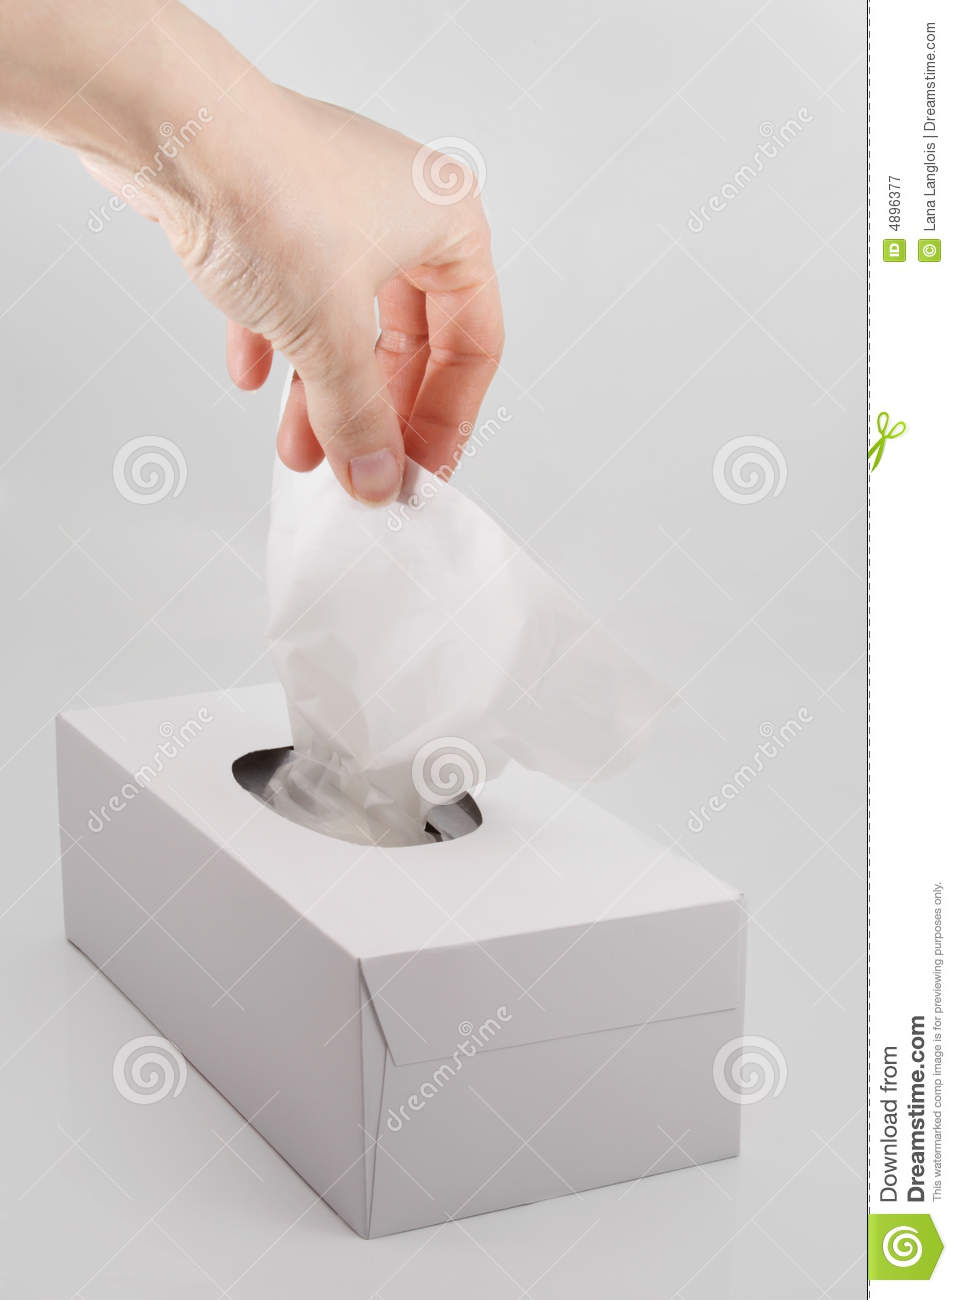 Hand Pulling Facial Tissue Royalty Free Stock Photography   Image